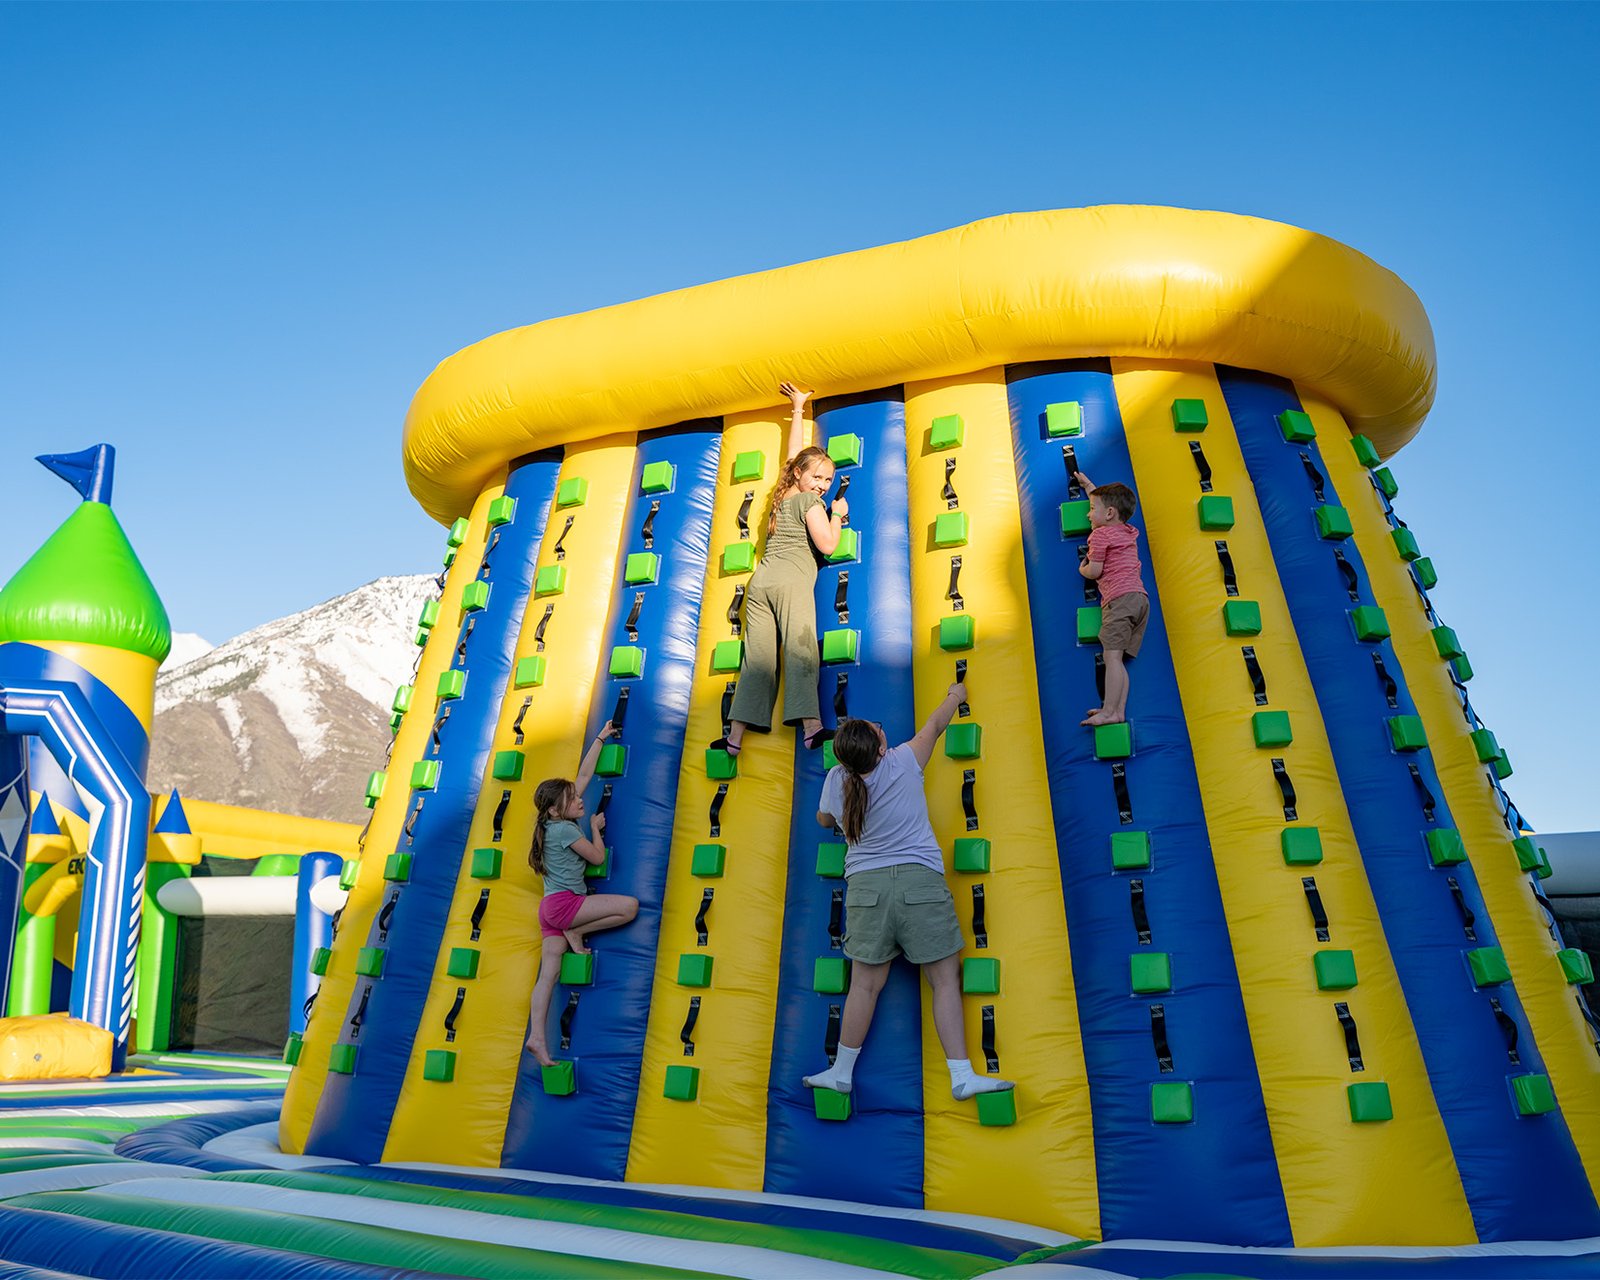 Kids climbing an inflatable climbing wall at one of the world's largest bounce houses